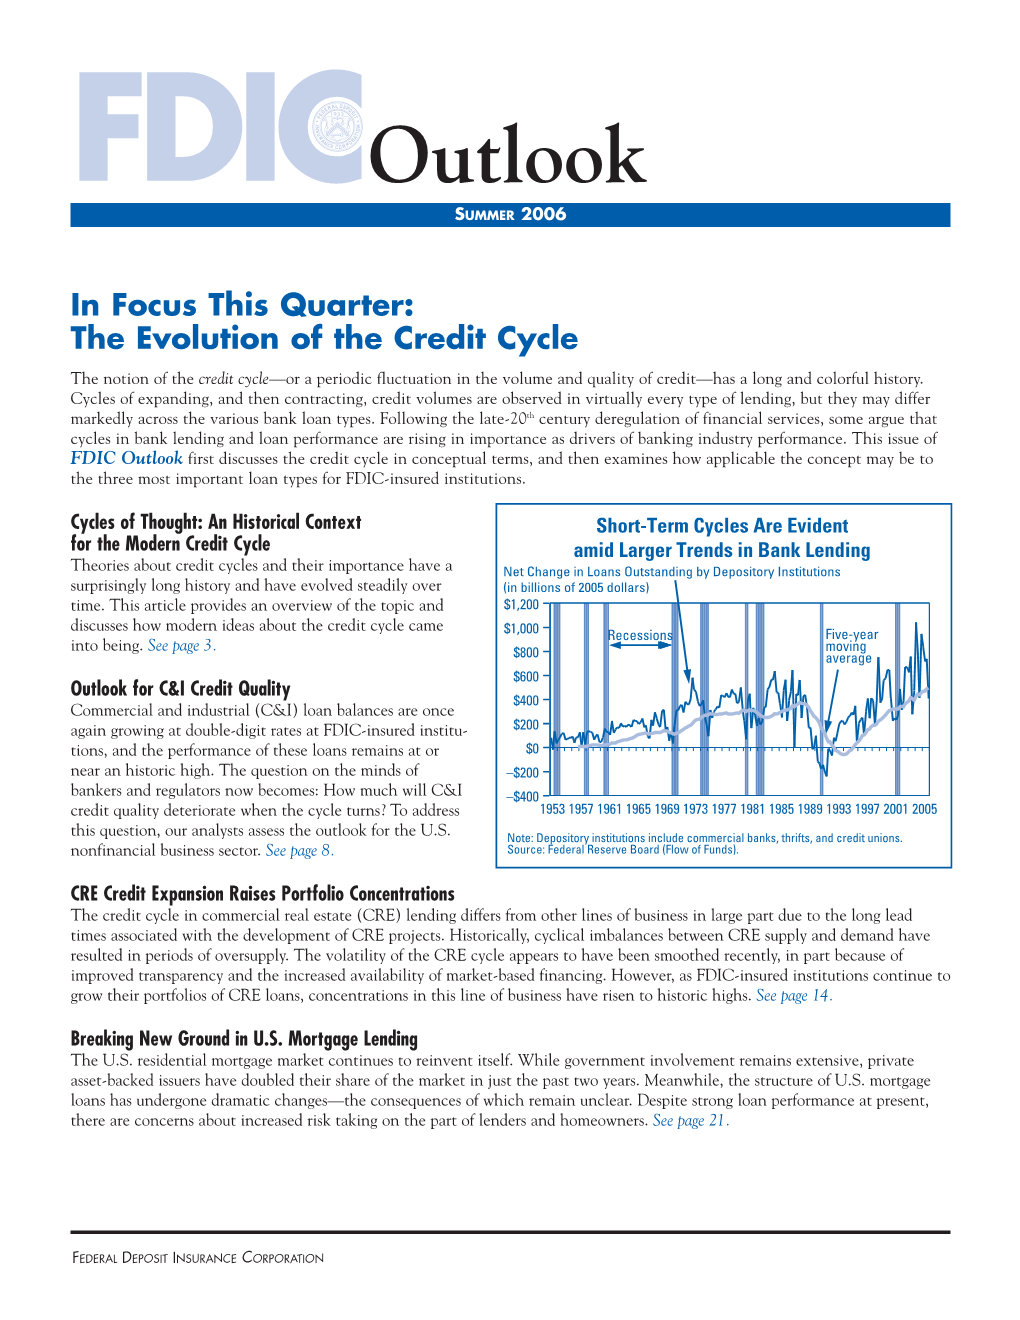 "FDIC Outlook Summer 2006"; "Cycles of Thought: an Historical